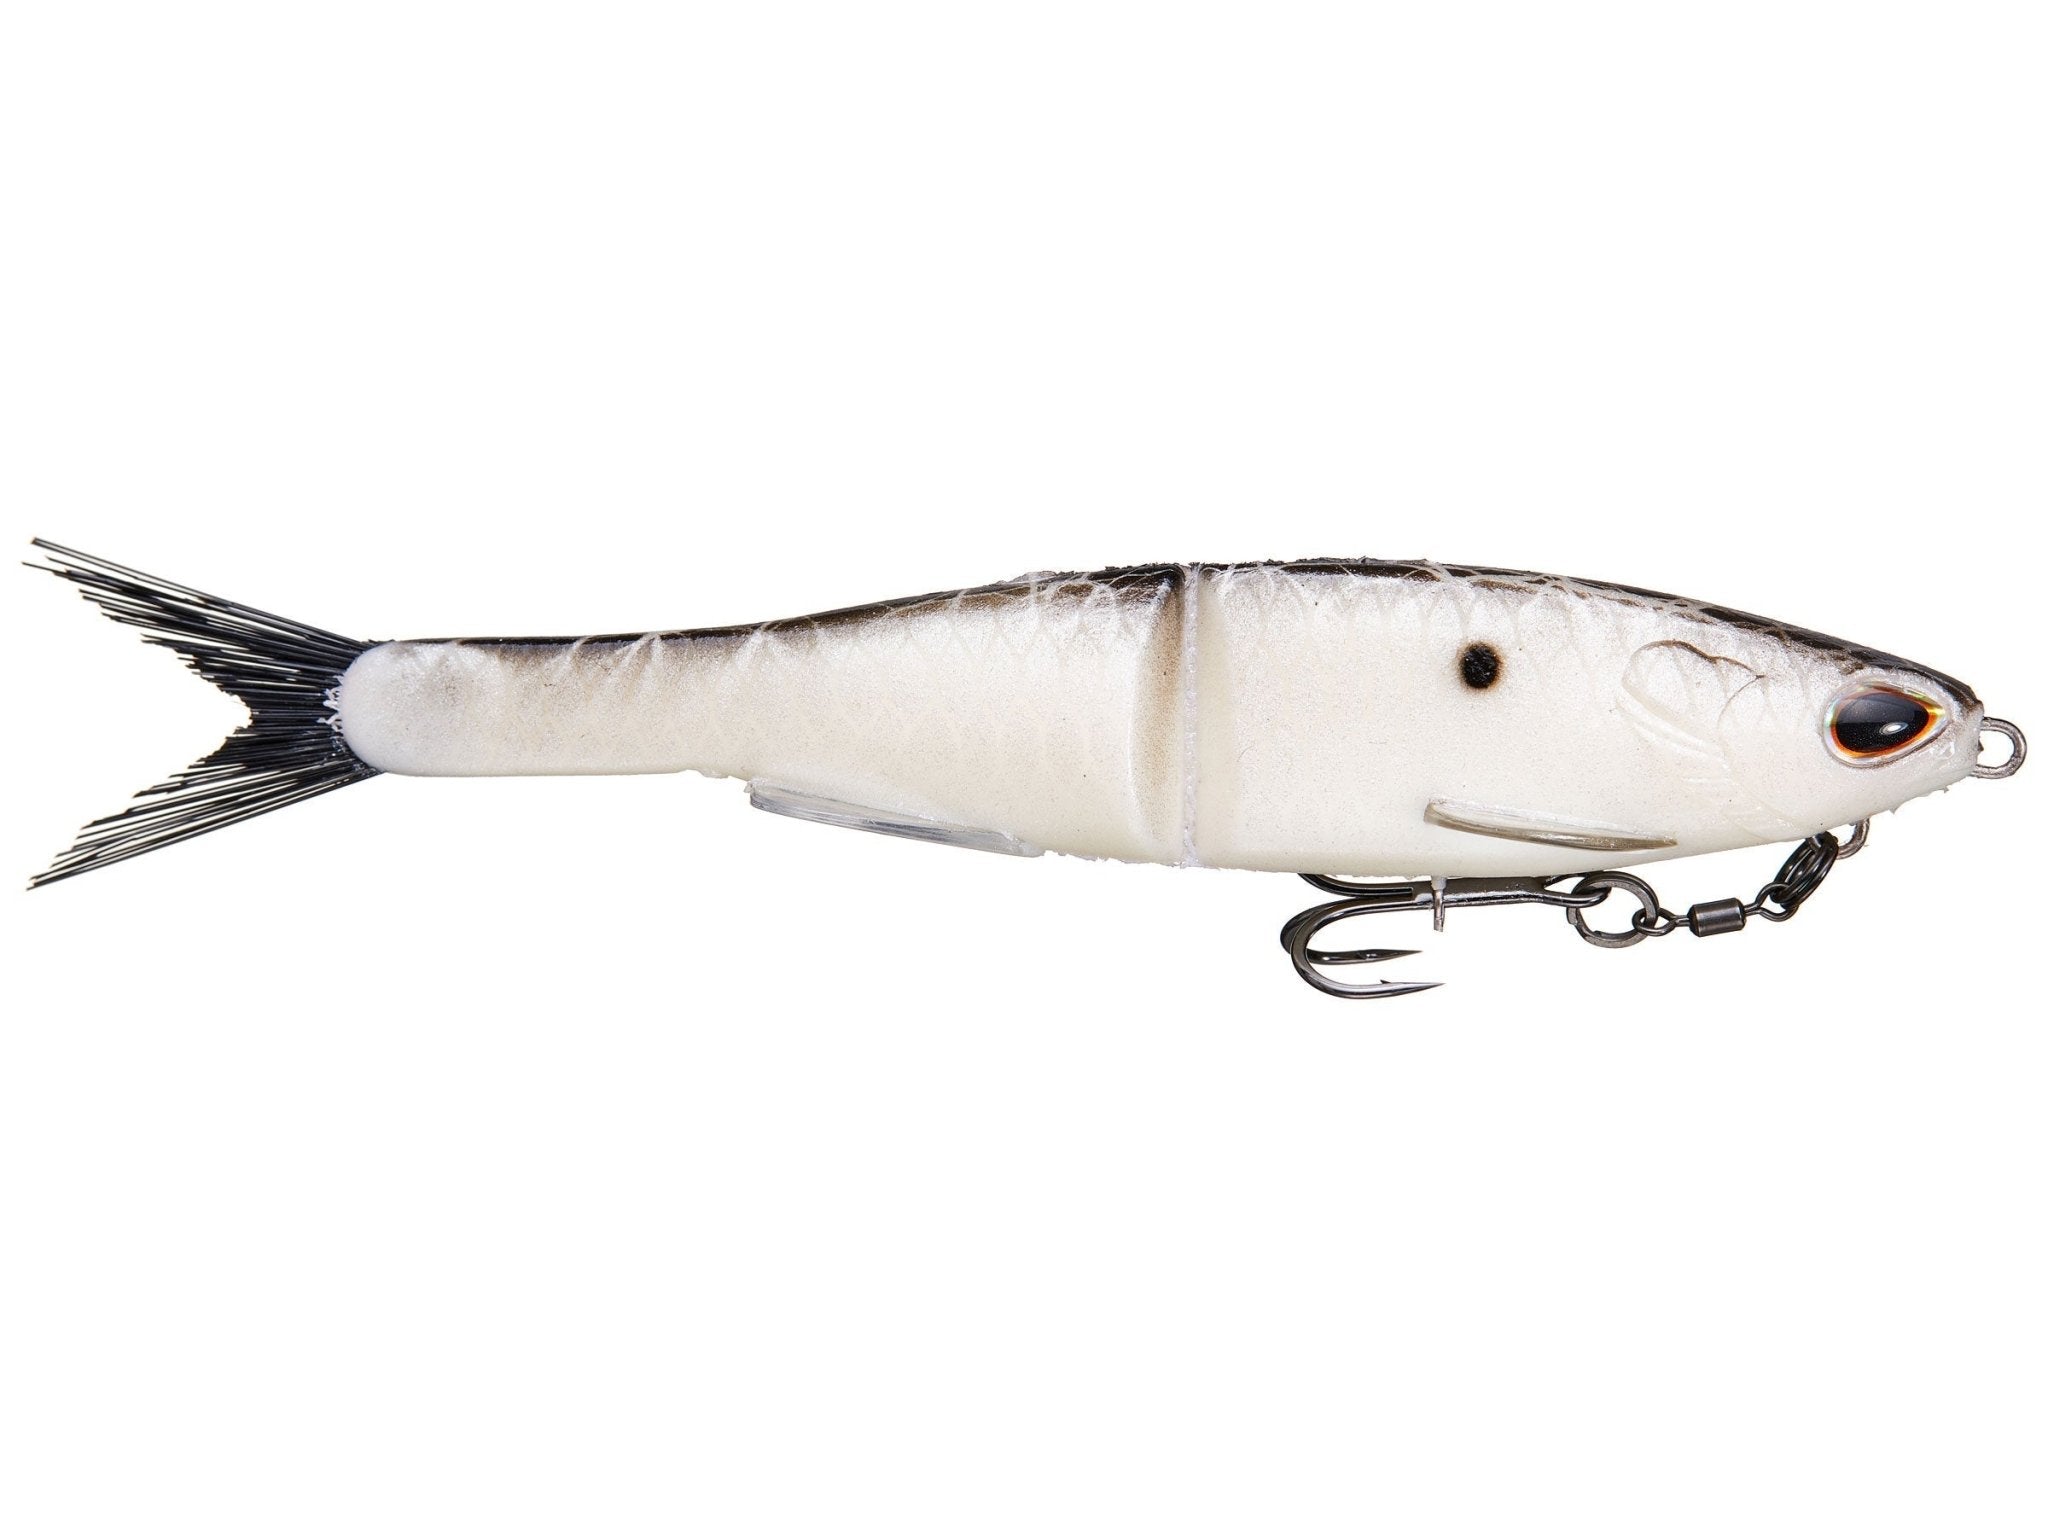 The Gracely baits shat glide in a shad pattern. #bnacustomlures #fisht